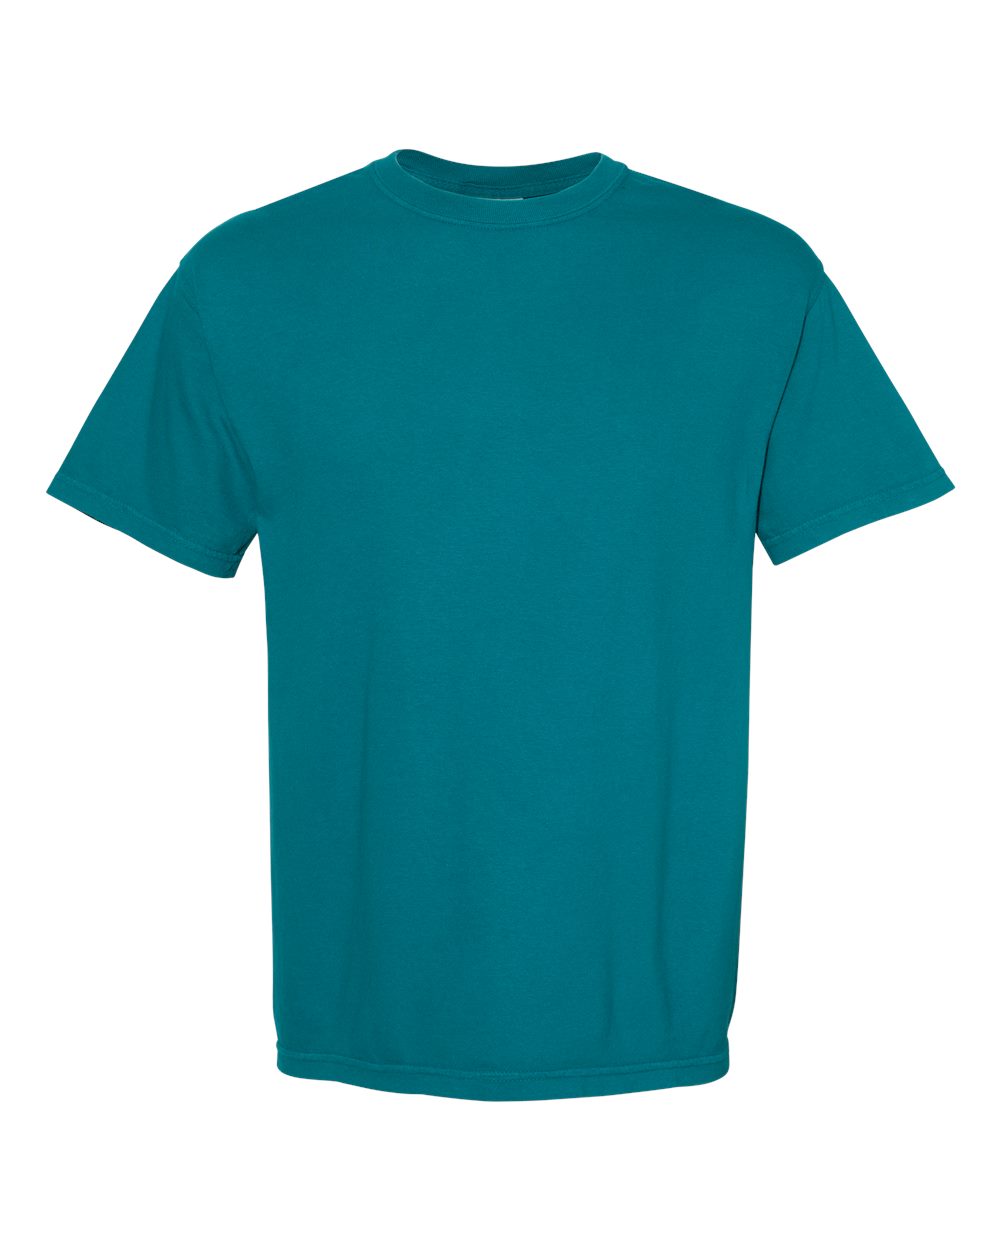 Comfort Colors Garment-Dyed Tee (1717) in Topaz Blue